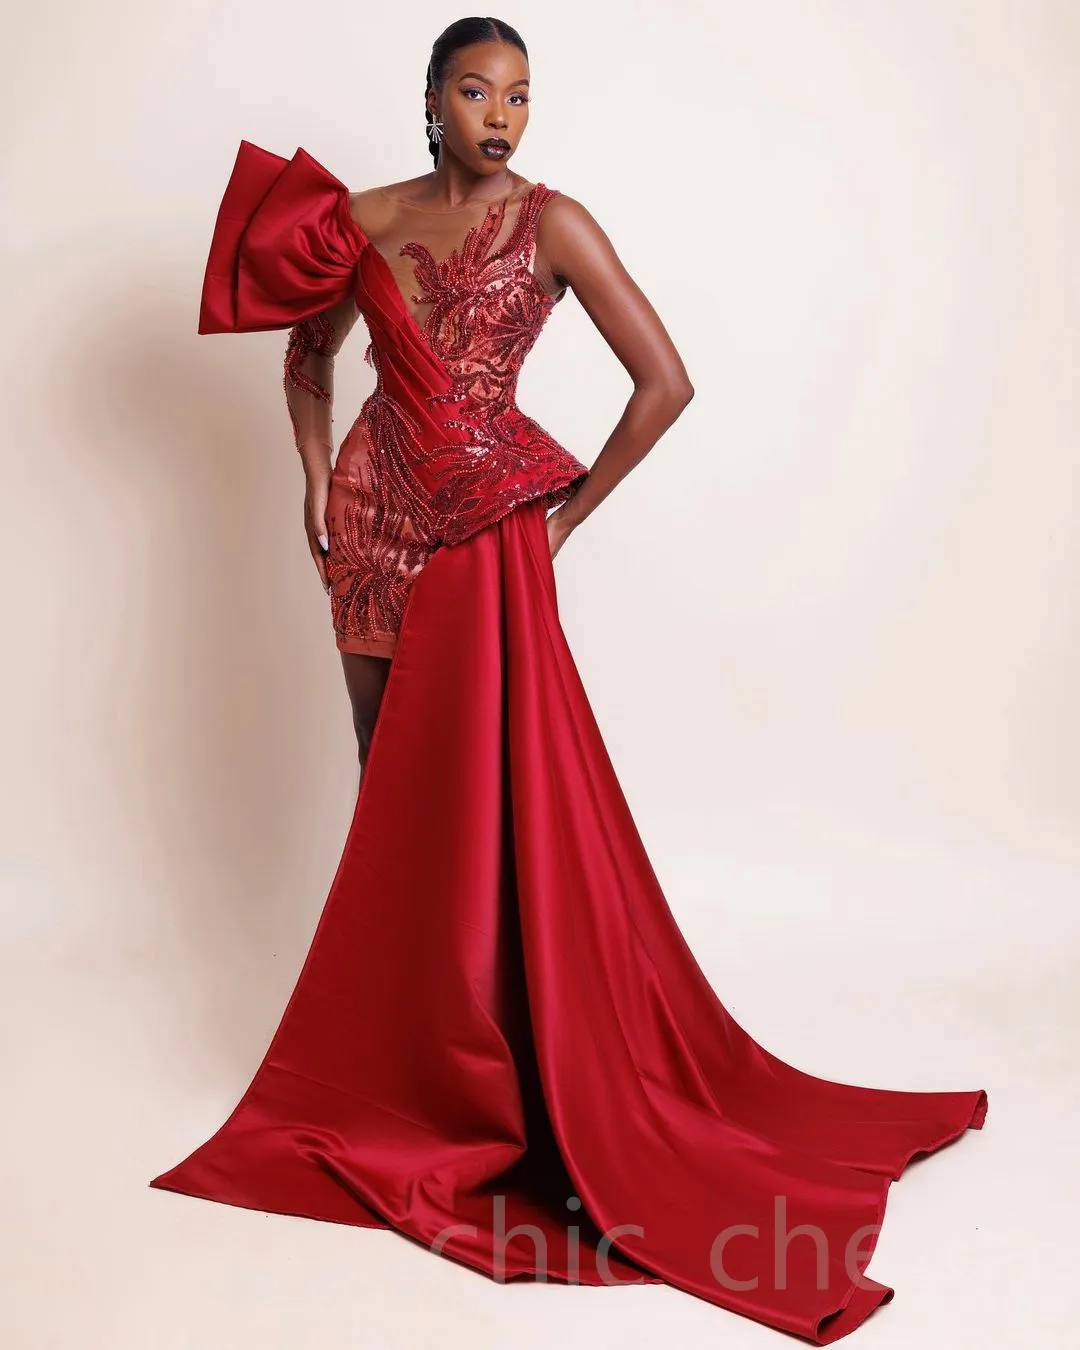 2023 Arabic Aso Ebi Red Sheath Prom Dresses Short Sequined Lace Sexy Evening Formal Party Second Reception Birthday Engagement Bridesmaid Gowns Dress ZJ1432